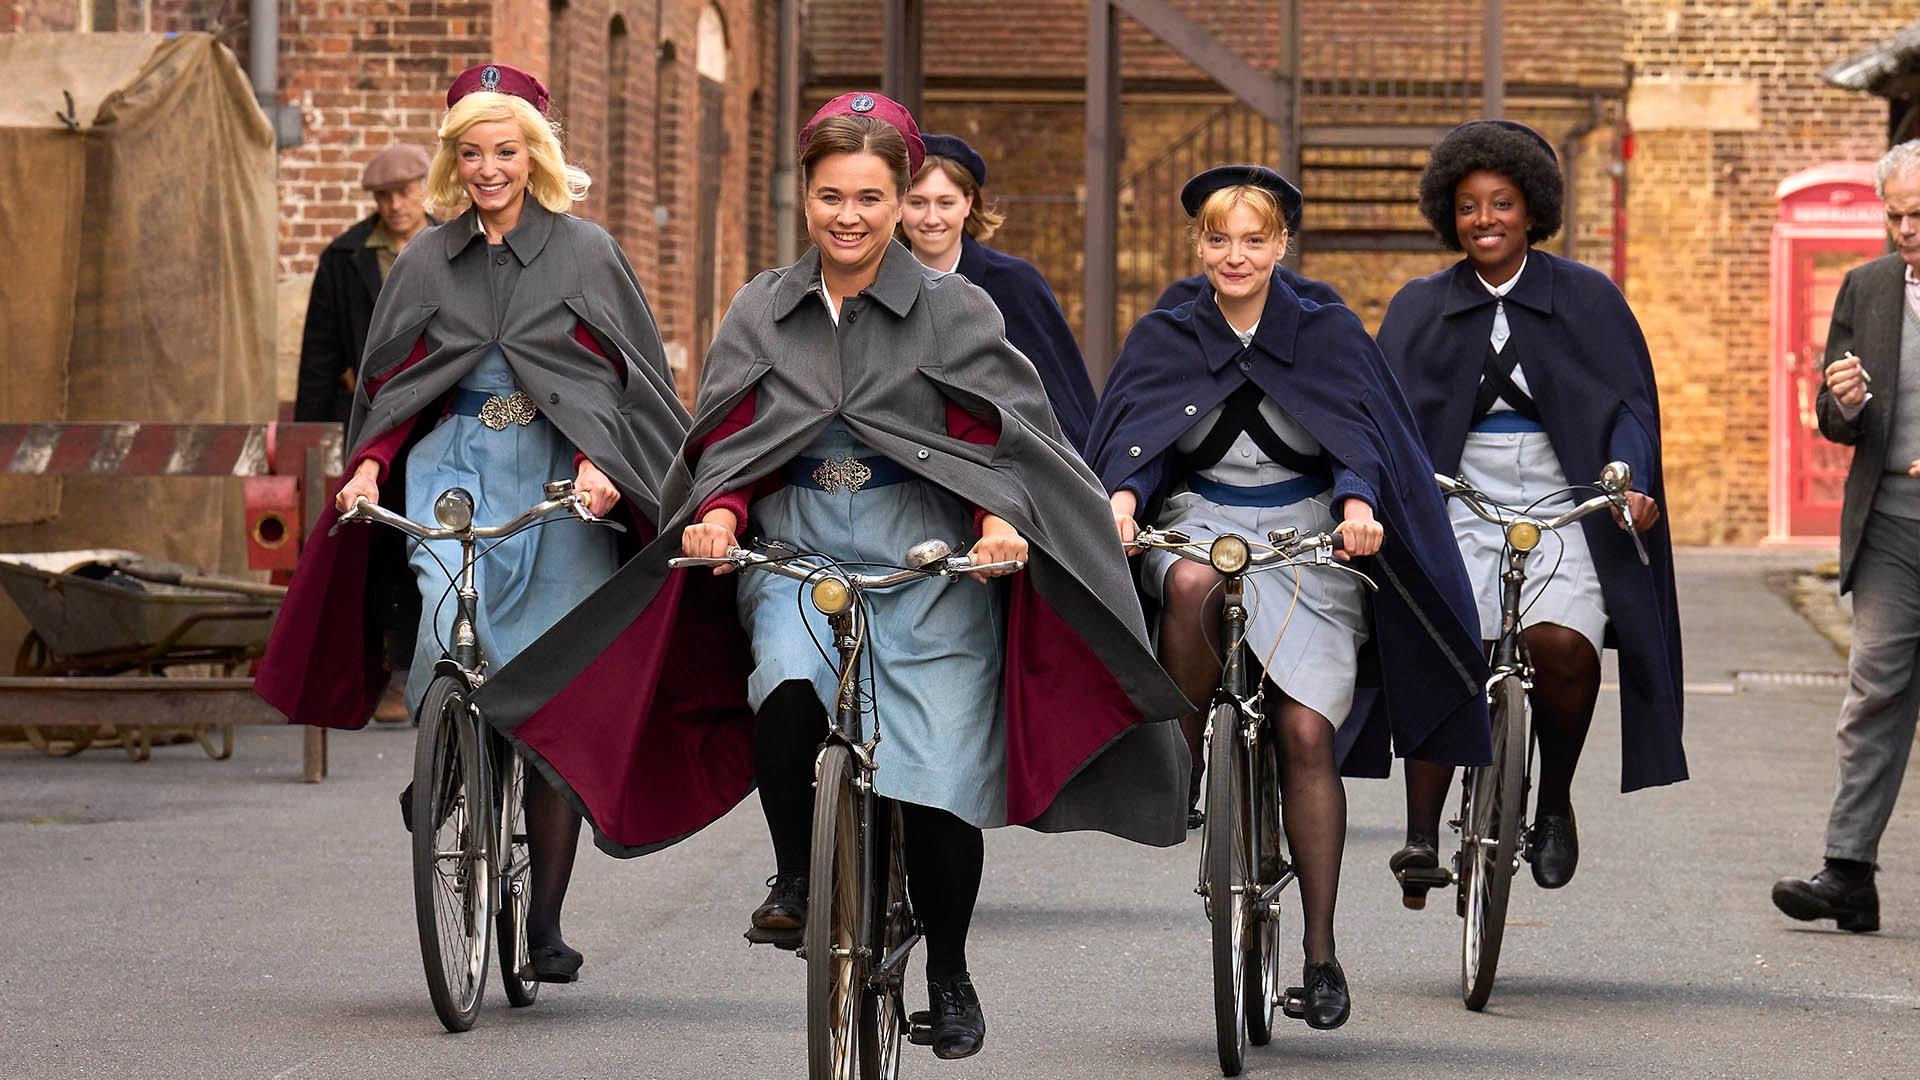 Call the Midwife Cast